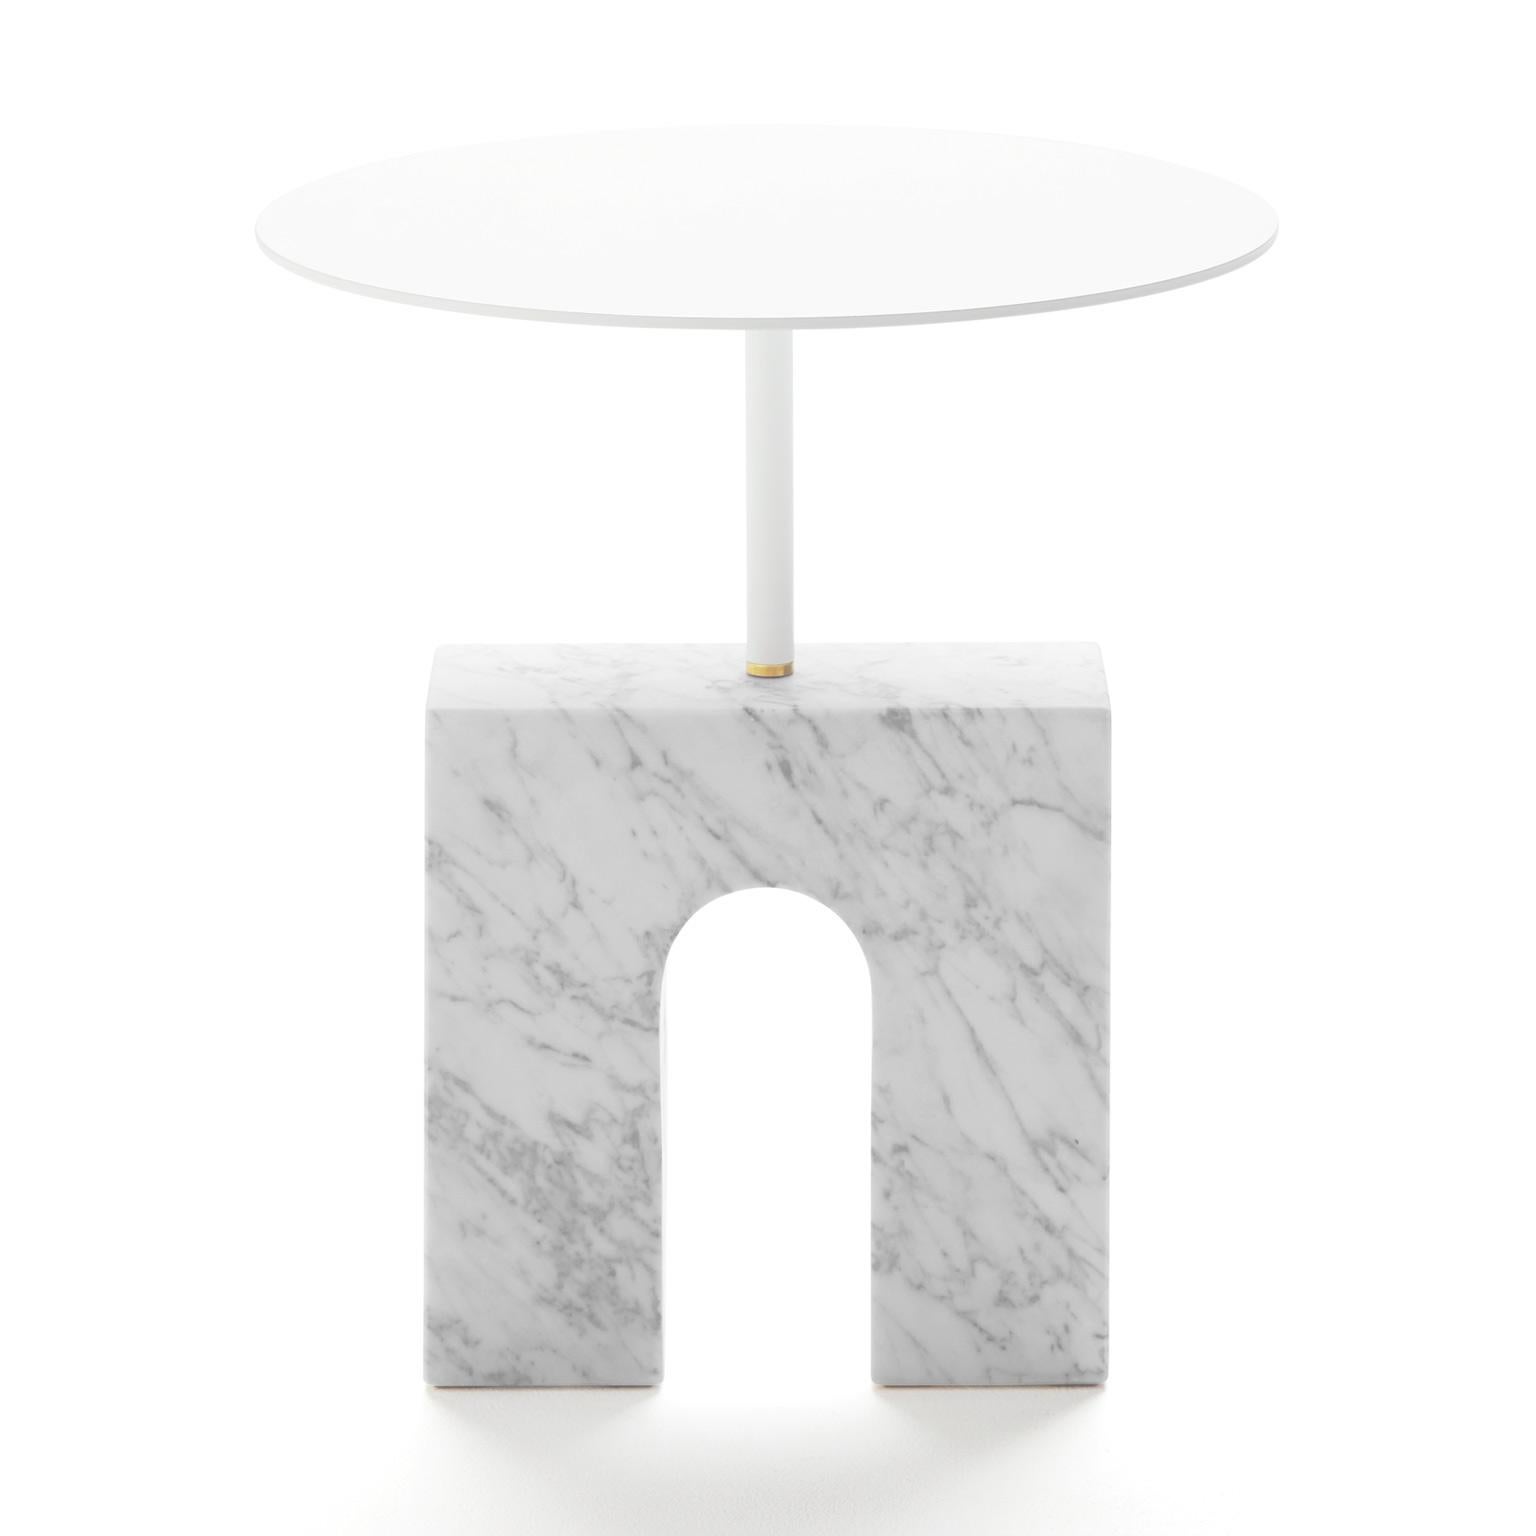 The Triumph Side Table is a minimalist style side table consisting of a treated Carrara marble base, a white lacquered aluminum round shaped top and a small brass piece, as a nexus between the two previous parts, all of them assembled in a logical